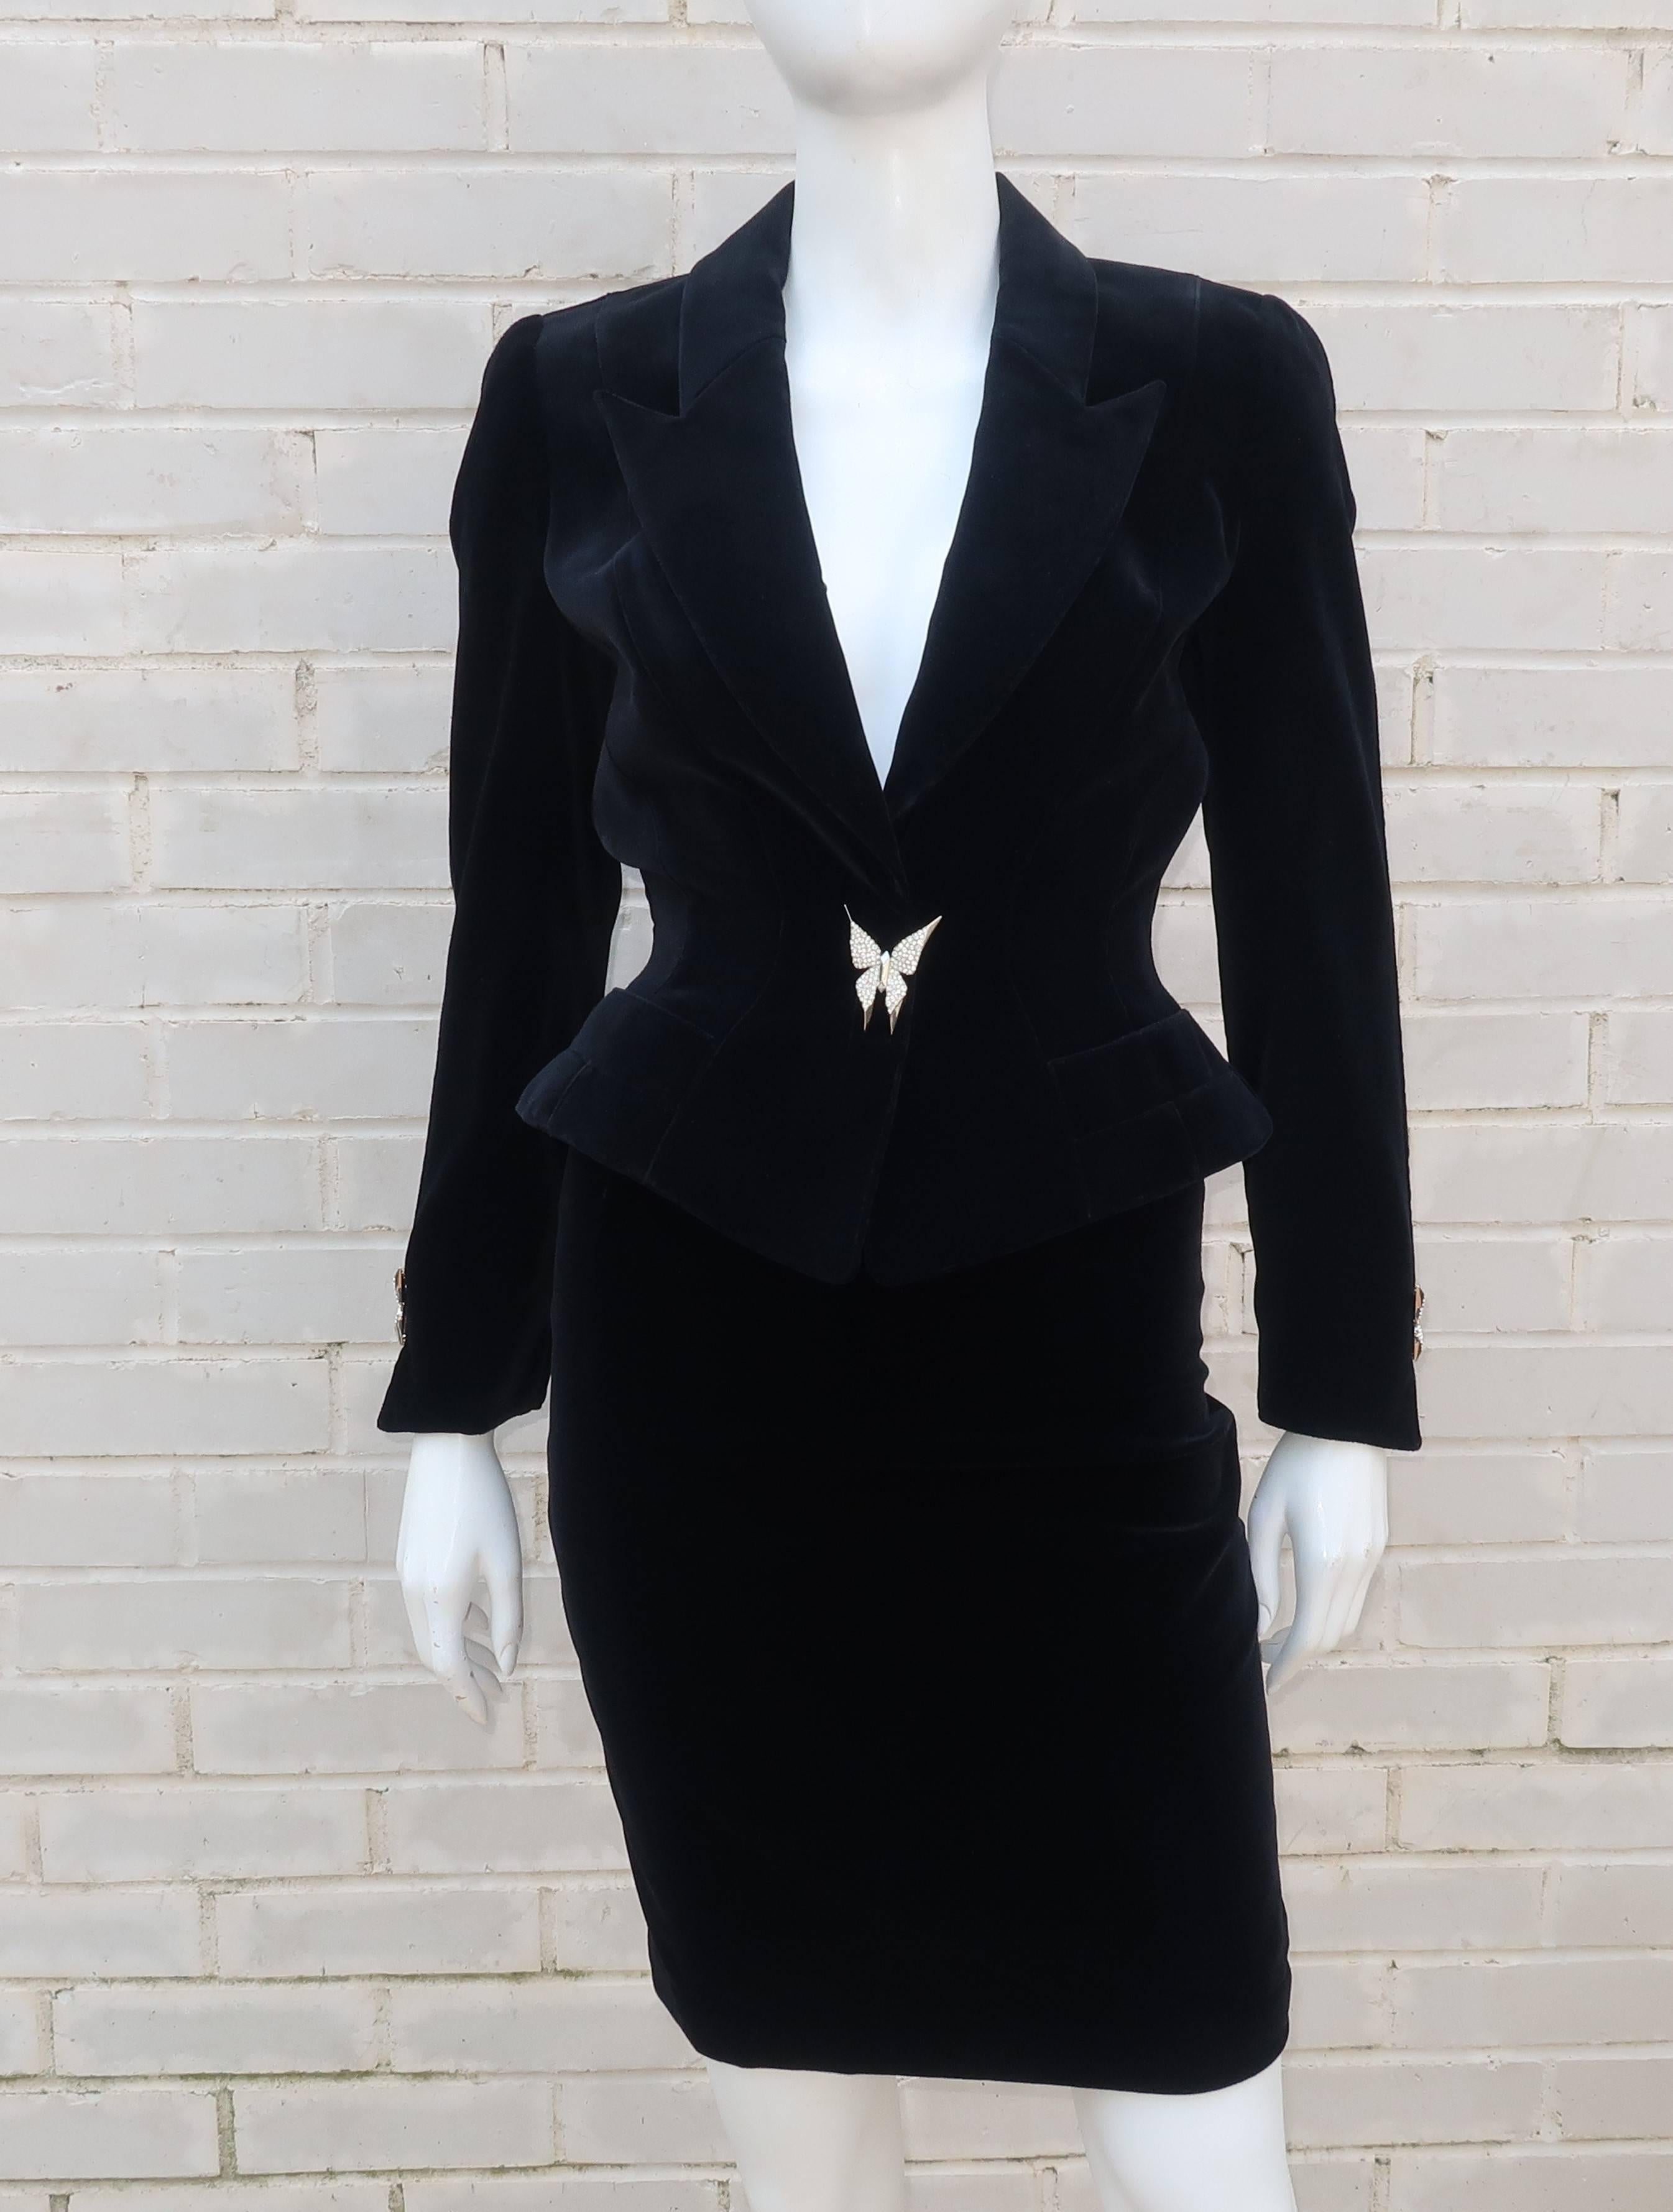 Vintage Thierry Mugler Black Velvet Wasp Waist Suit With Butterfly Buttons 7